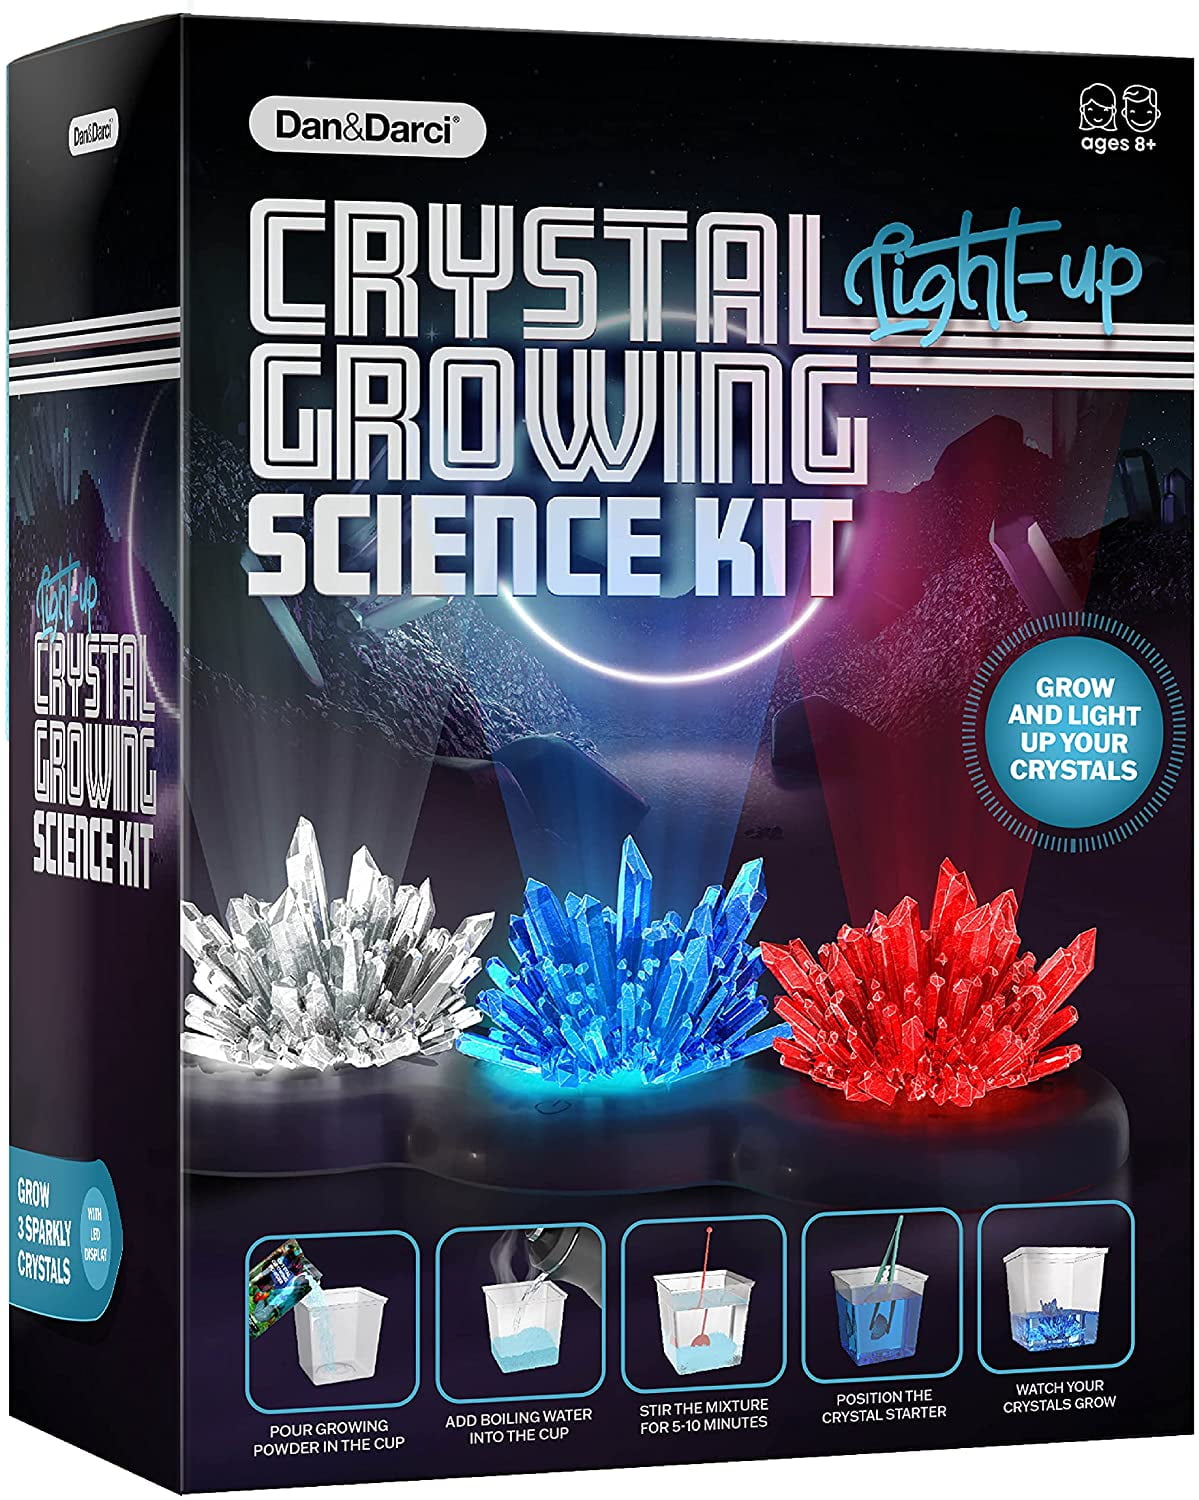 Girls Boys Teenagers Children Creative Discover Science Crystal Growing Kit